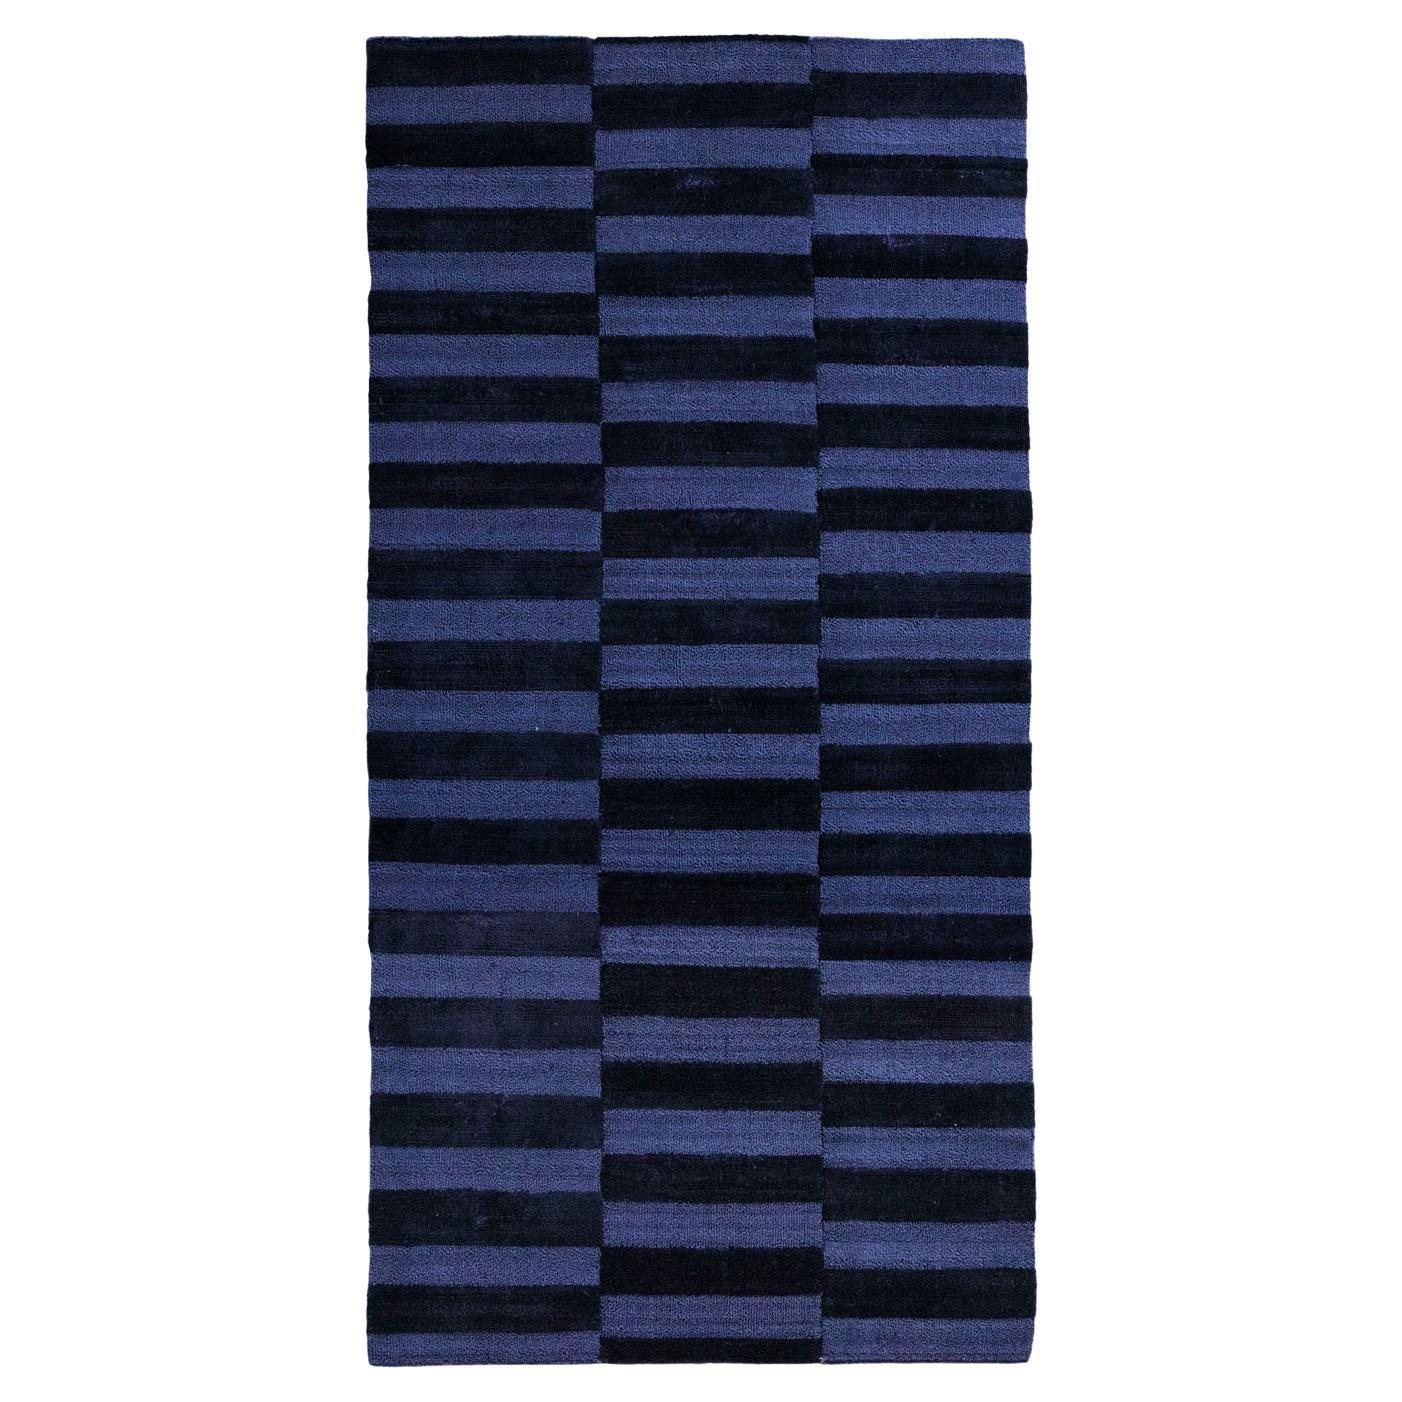 Contemporary Striped Luxury Shiny Velvety Blue Rug by Deanna Comellini 150x300cm For Sale